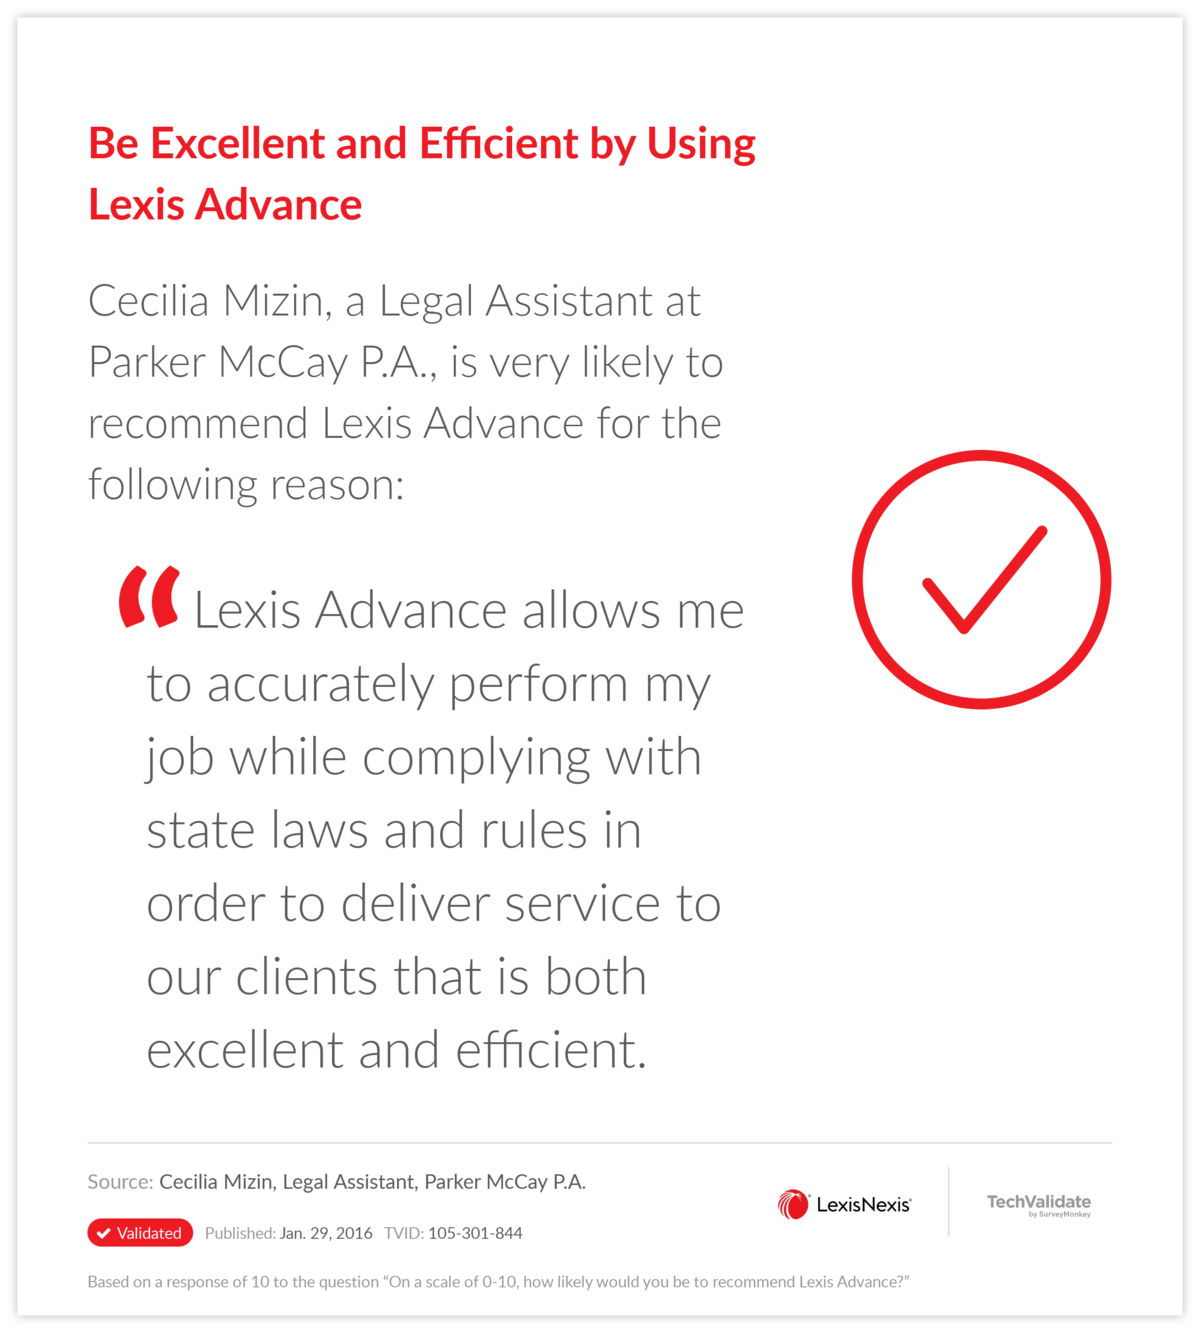 Be Excellent and Efficient by Using Lexis Advance